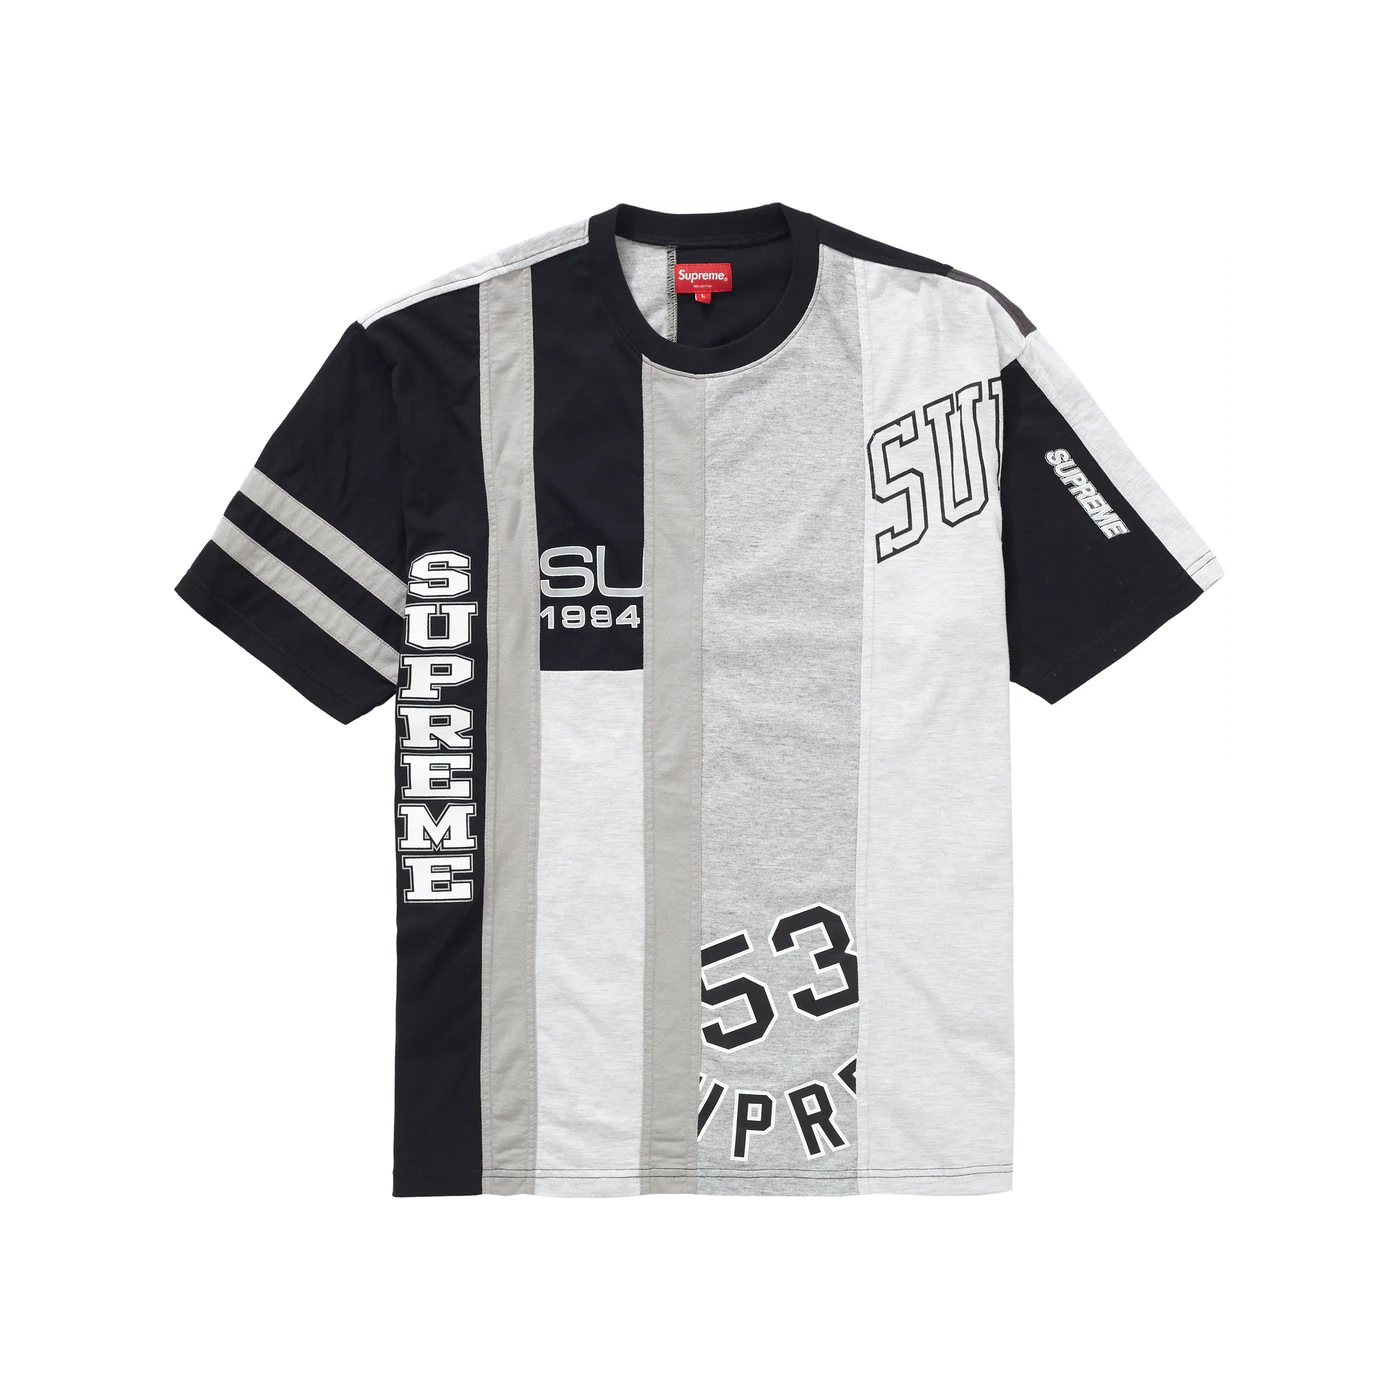 Supreme Reconstructed S/S Top BlackSupreme Reconstructed S/S Top